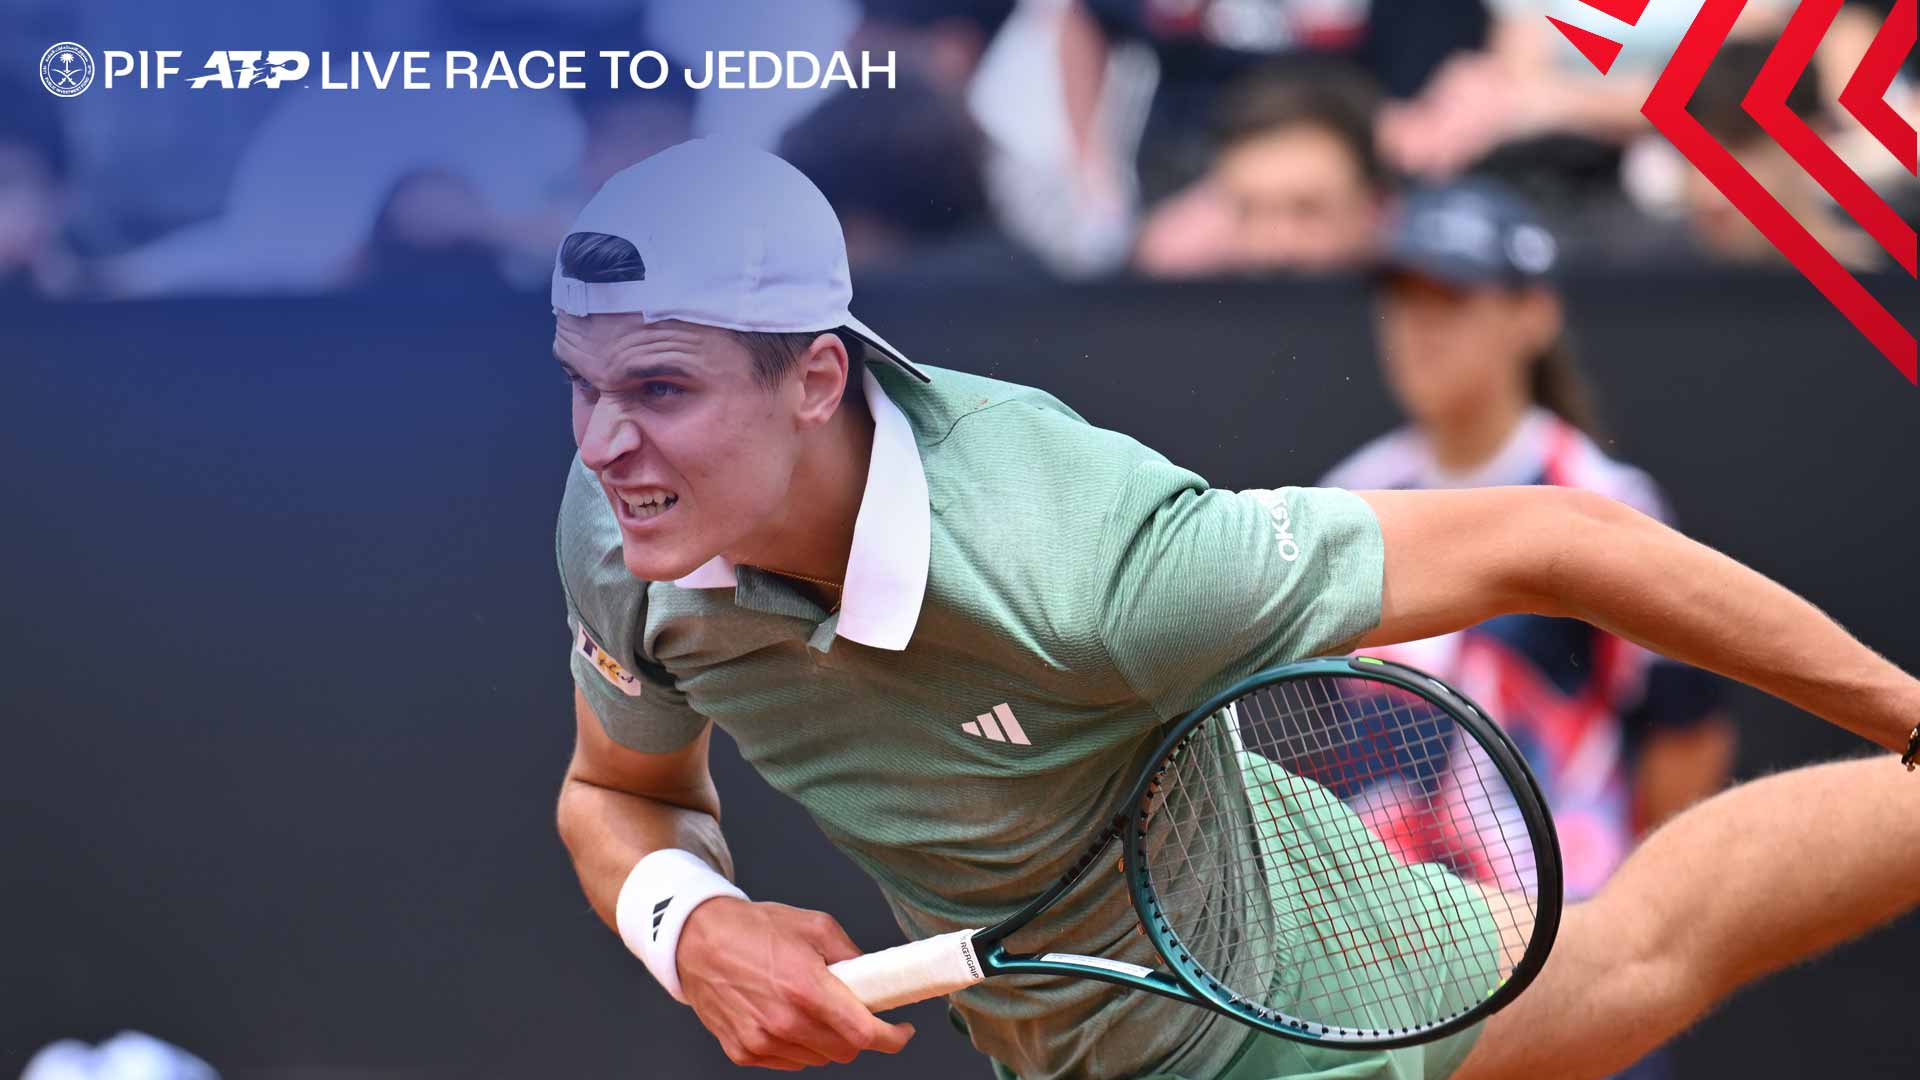 Jakub Mensik is second in the PIF ATP Live Race To Jeddah.